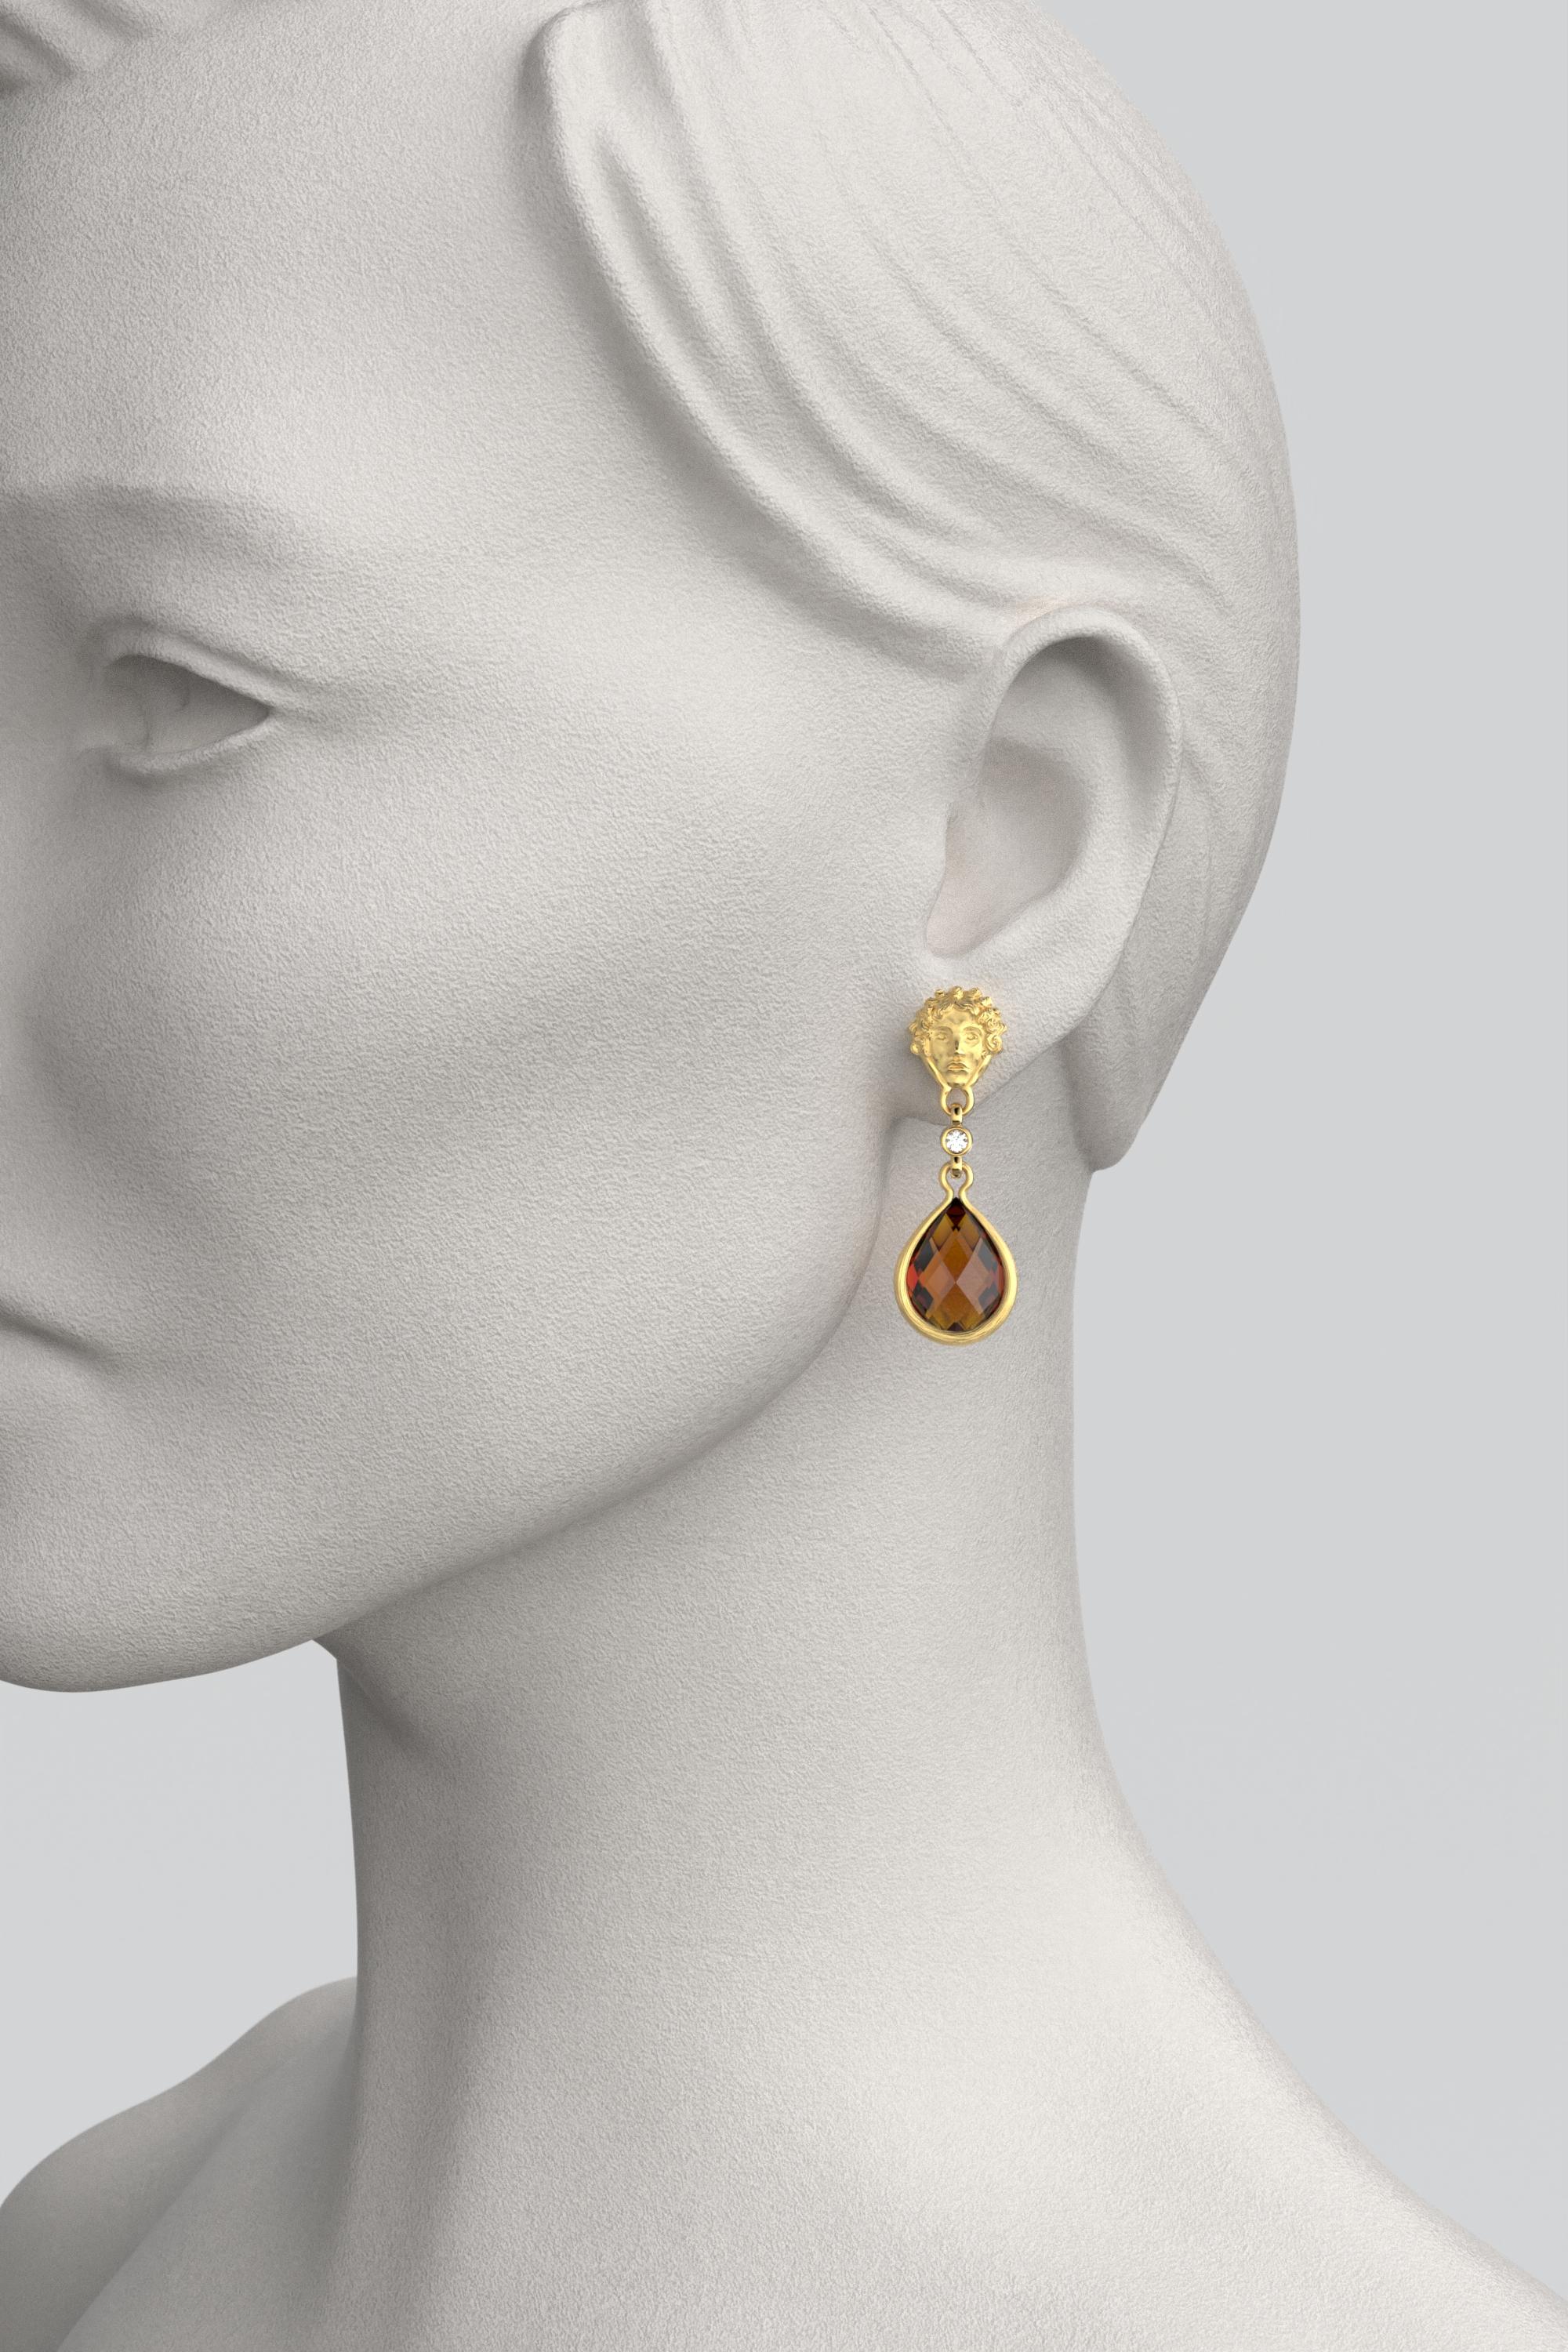 Madeira Citrine and Diamond Dangle Drop Earrings in 18k Solid Gold Made in Italy In New Condition For Sale In Camisano Vicentino, VI